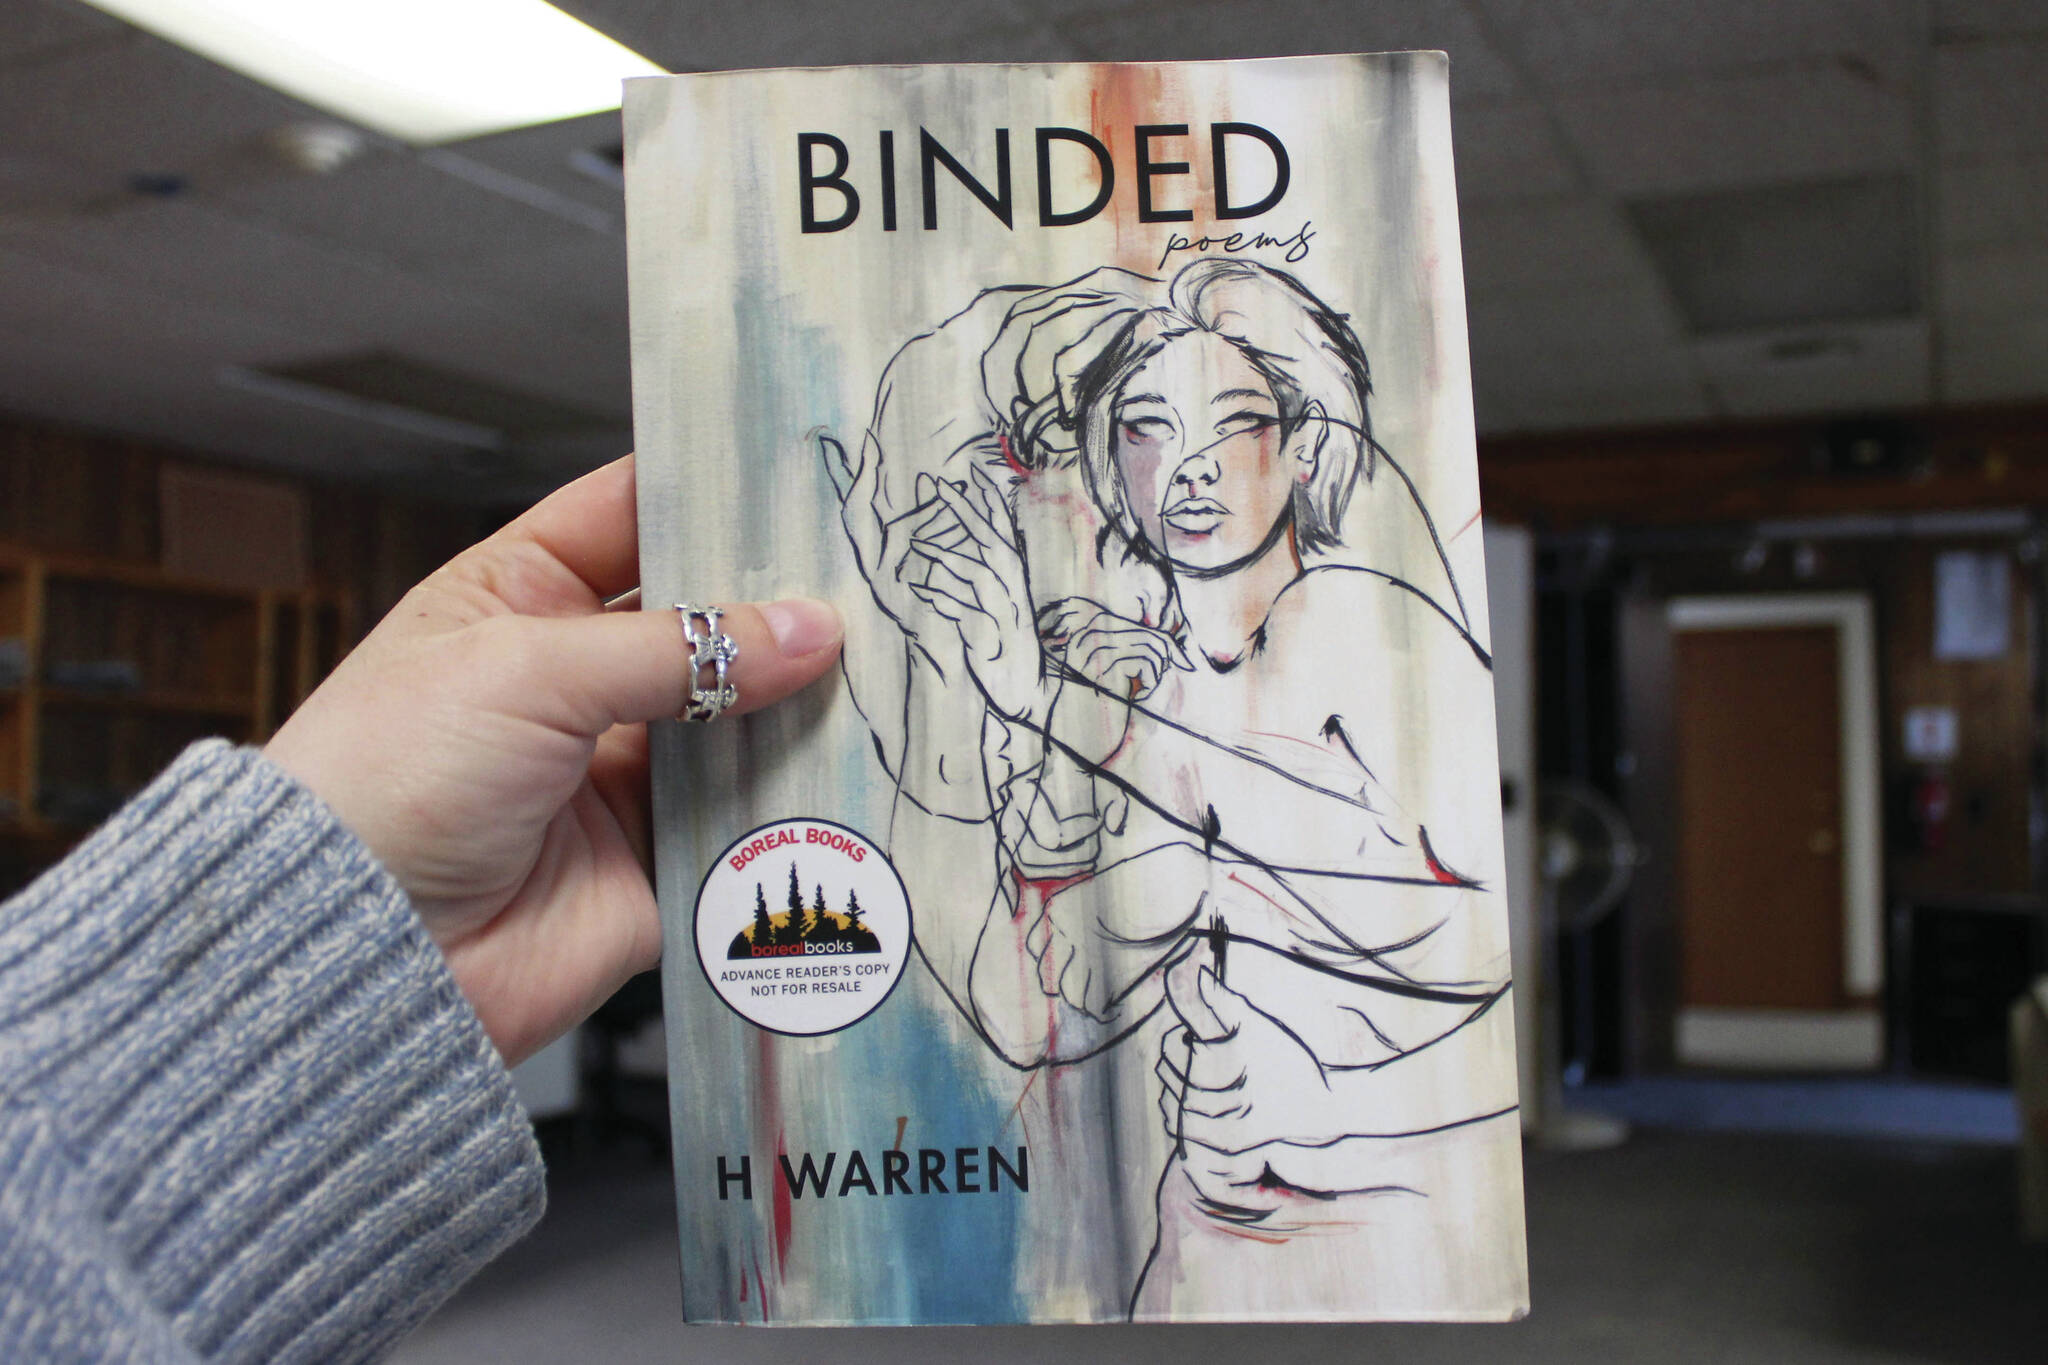 Ashlyn O’Hara/Peninsula Clarion
A copy of H Warren’s “Binded” is held in the Peninsula Clarion building on Thursday.